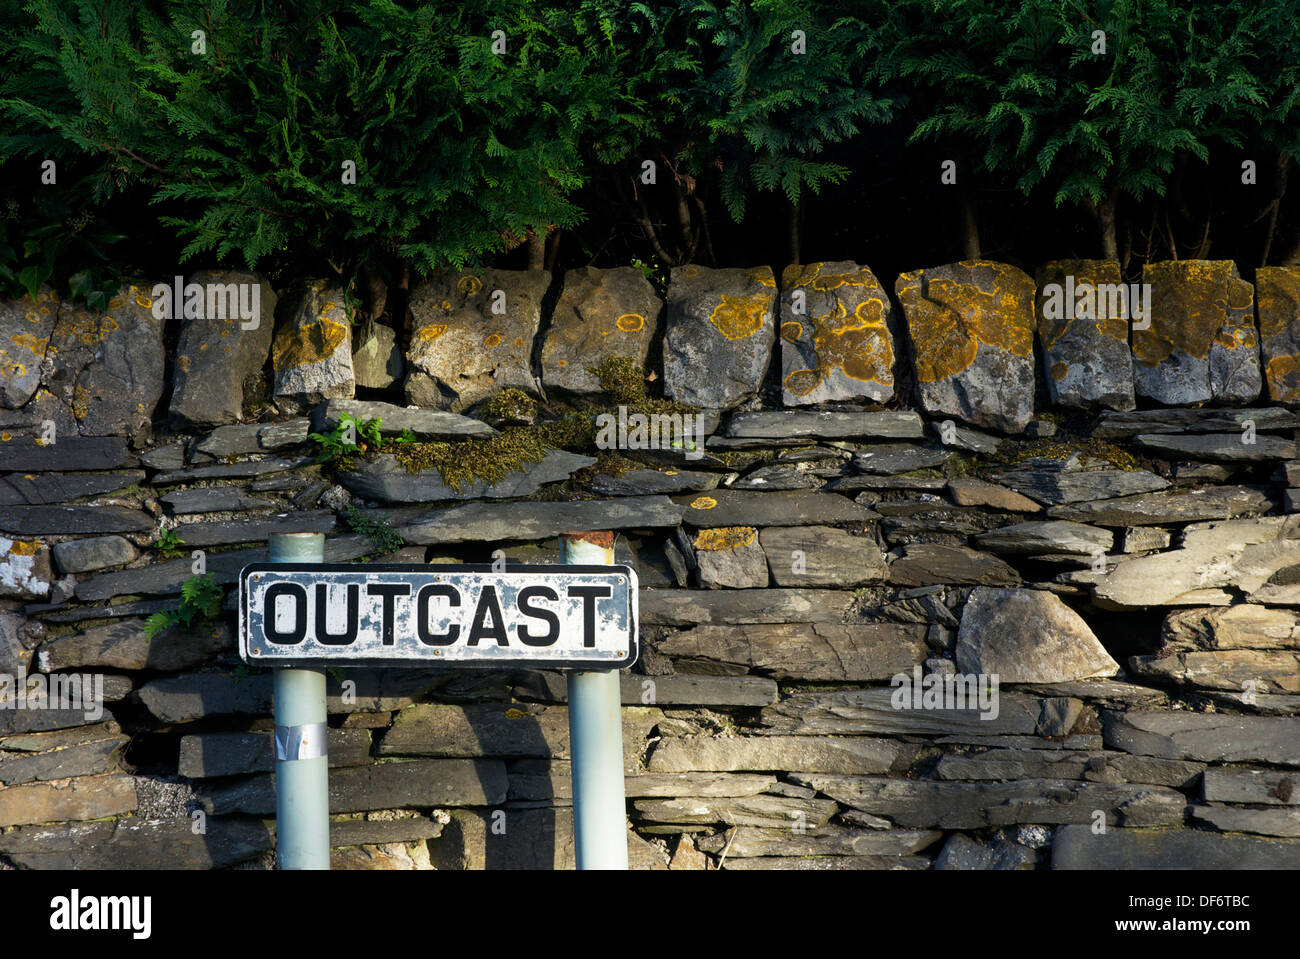 Street sign - Outcast - in the town of Ulverston, Cumbria, England UK Stock Photo